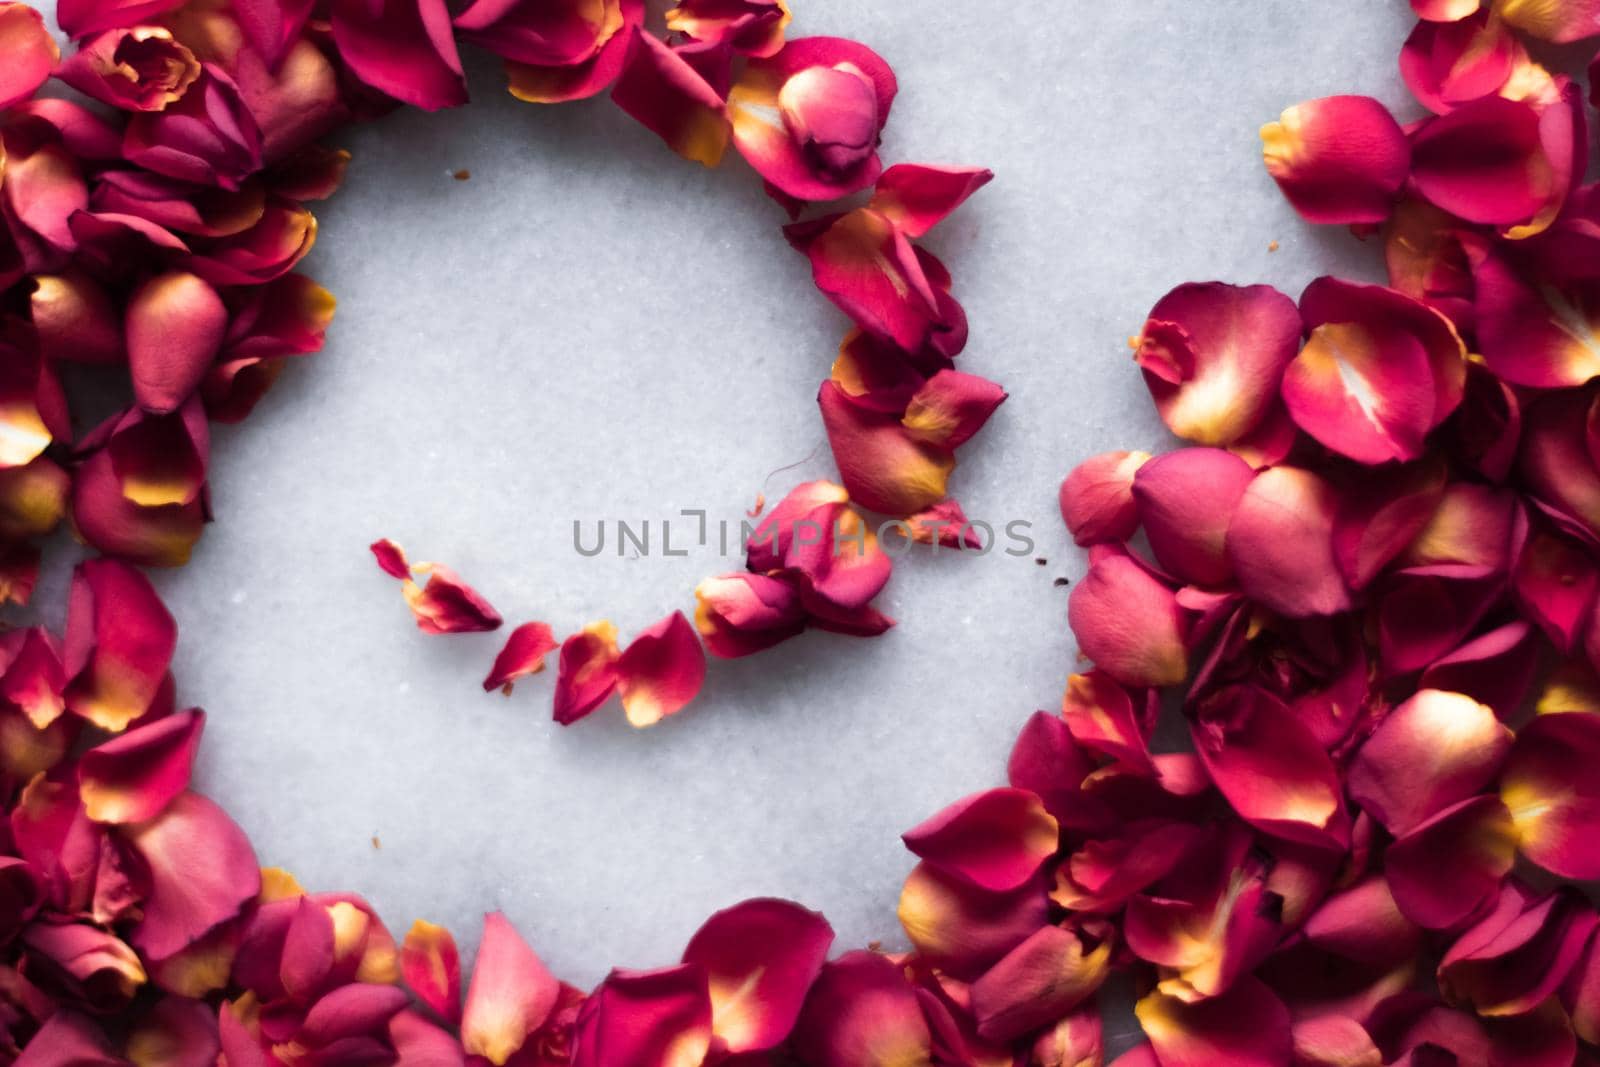 rose petals on marble flatlay - wedding, holiday and floral background styled concept by Anneleven